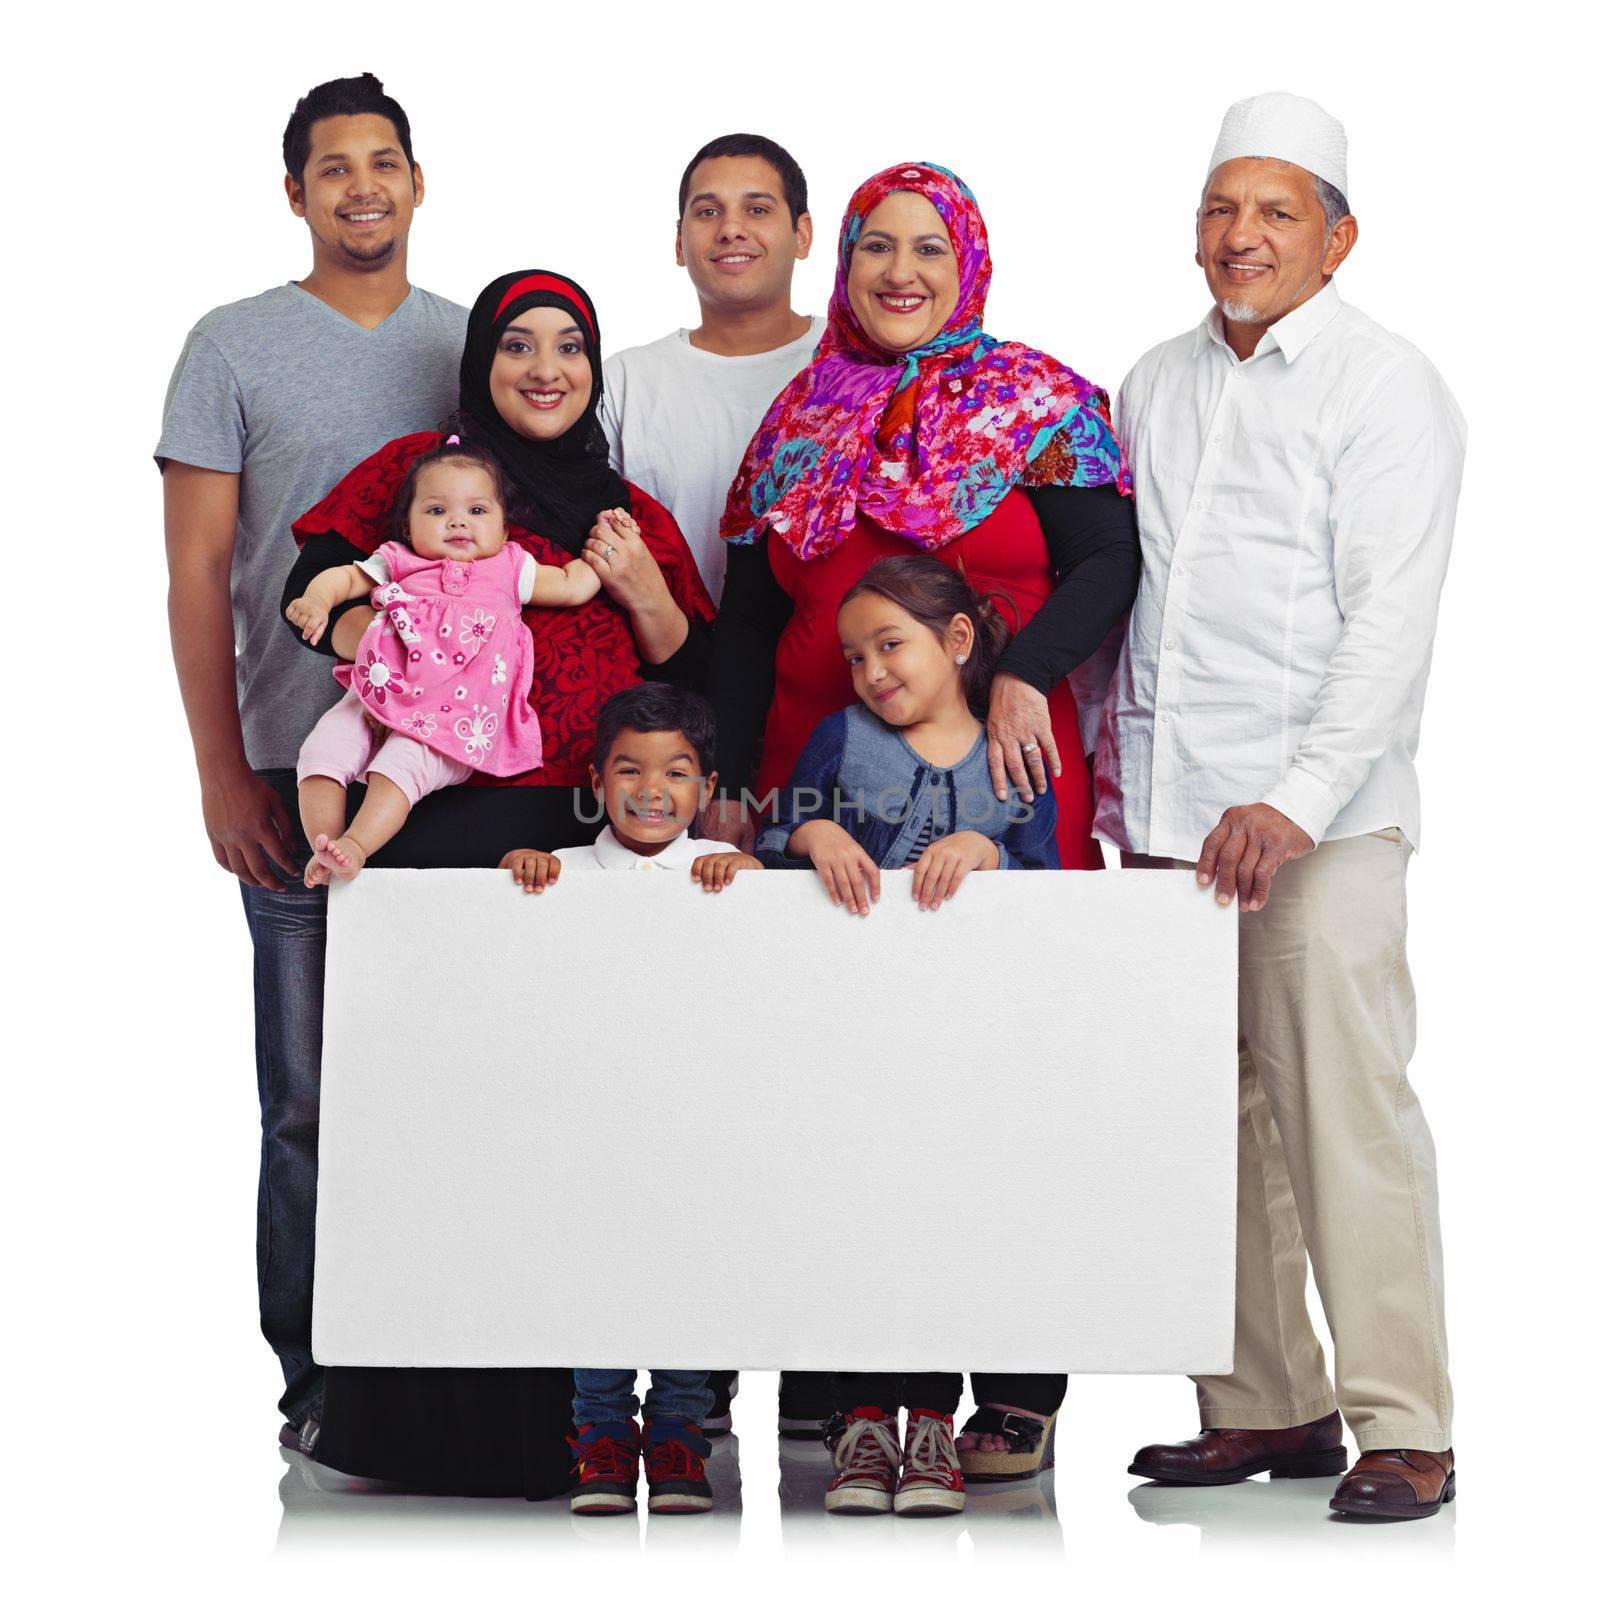 Poster, portrait and muslim family with space for advertising Islam religion with children, men and women. Islamic people and kids with banner sign for eid promotion isolated on a white background.